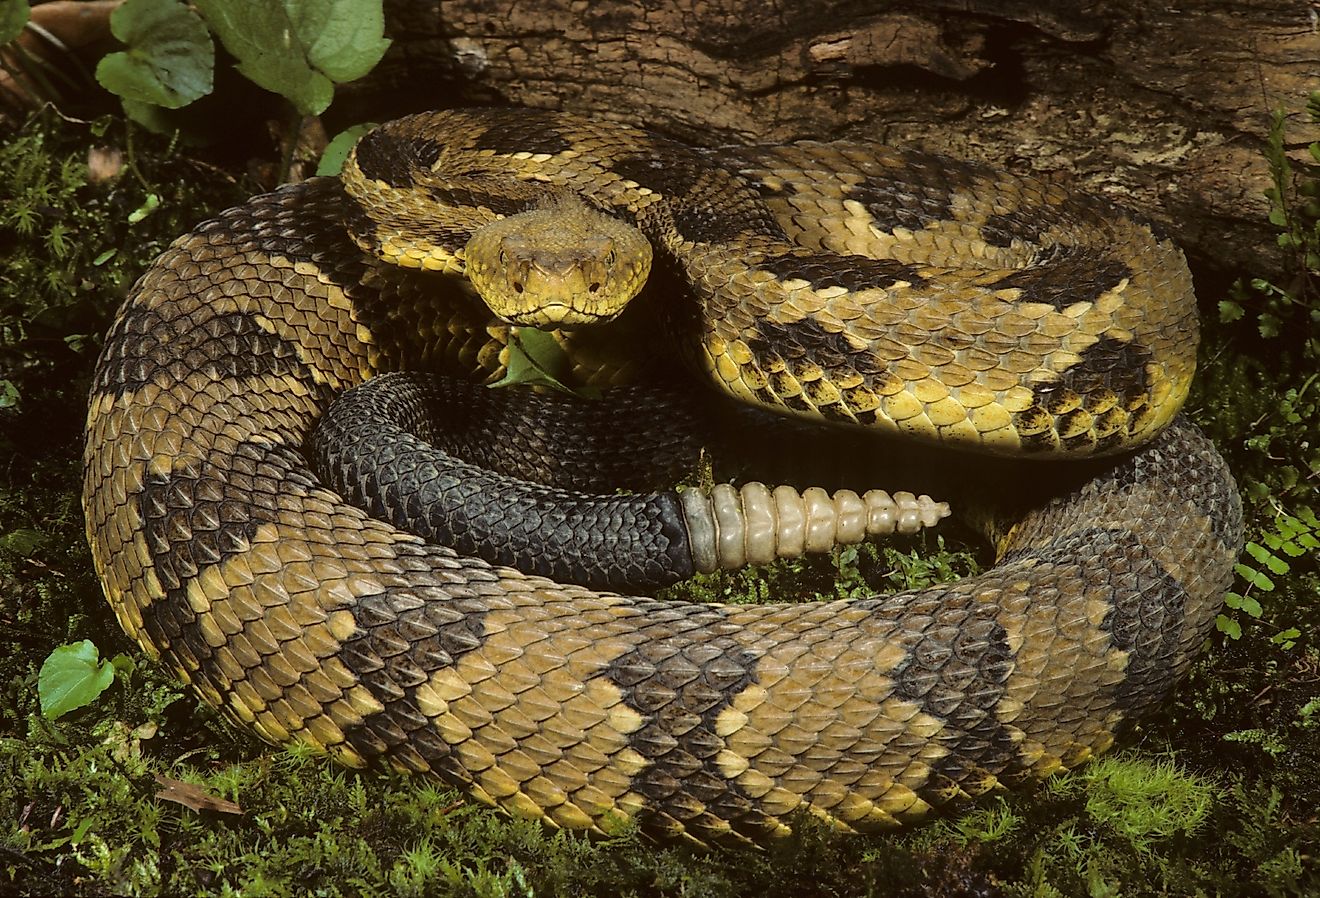 Timber Rattlesnake coiled (Crotalus horridus h.) in New Jersey.